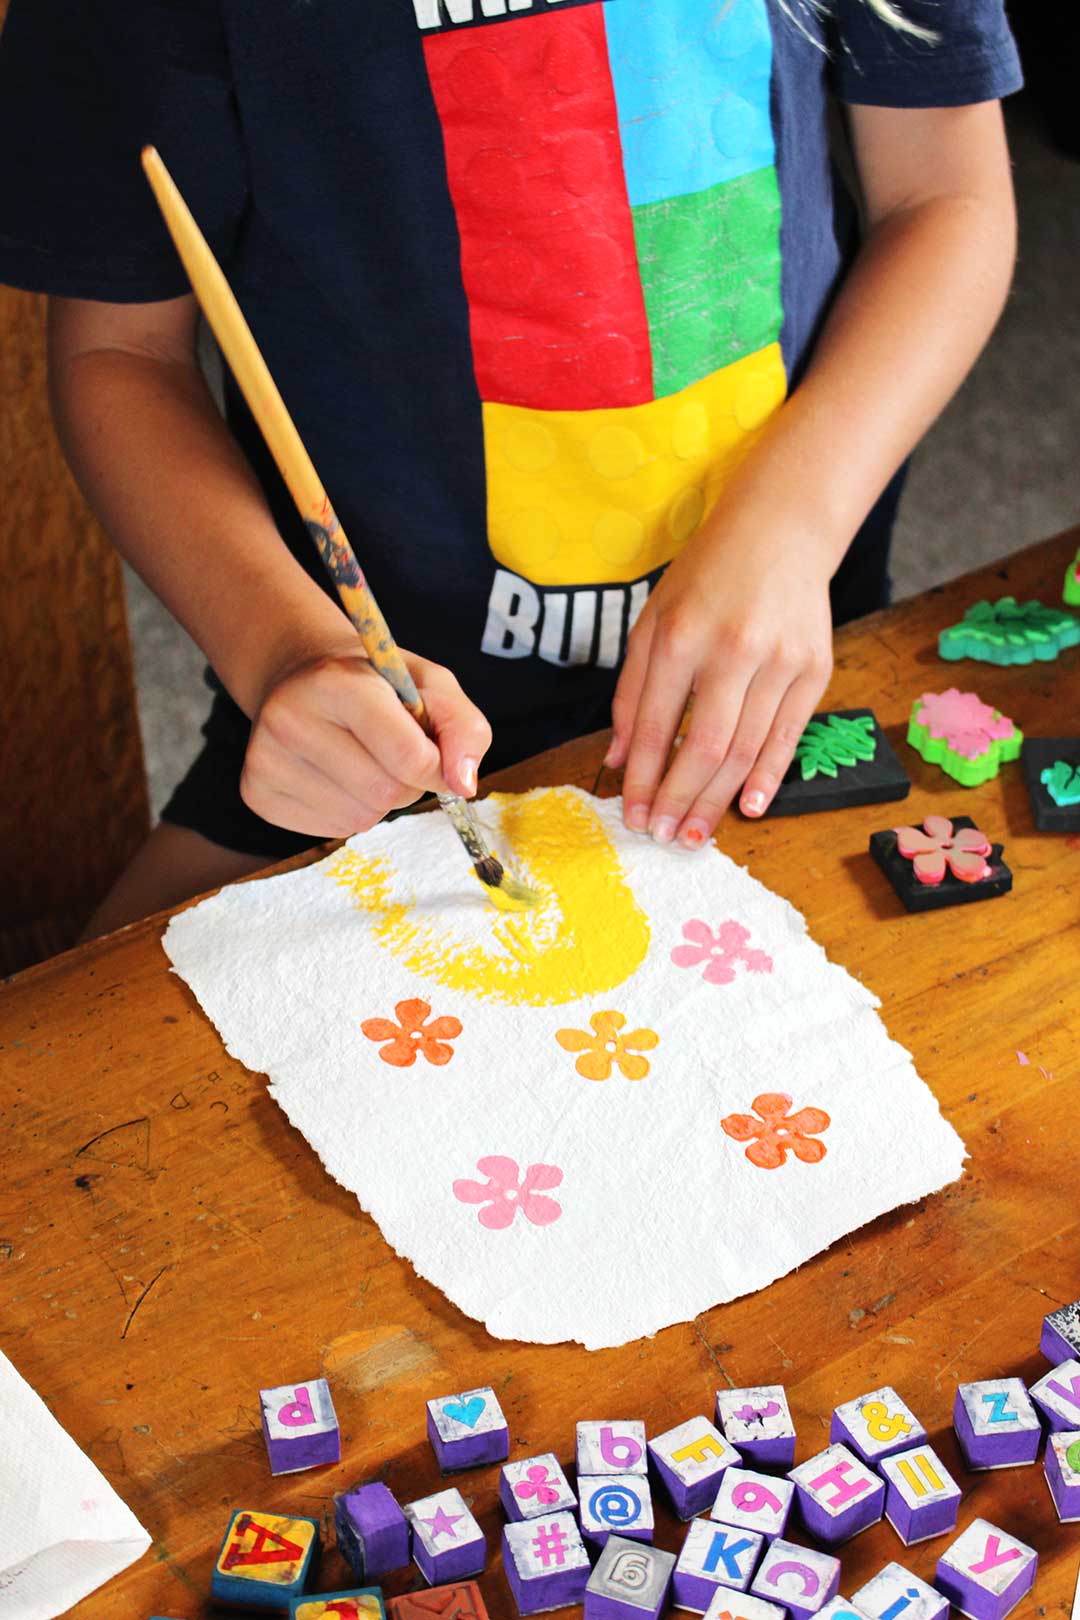 Child painting yellow arch on homemade paper stamped with pink and orange flowers.